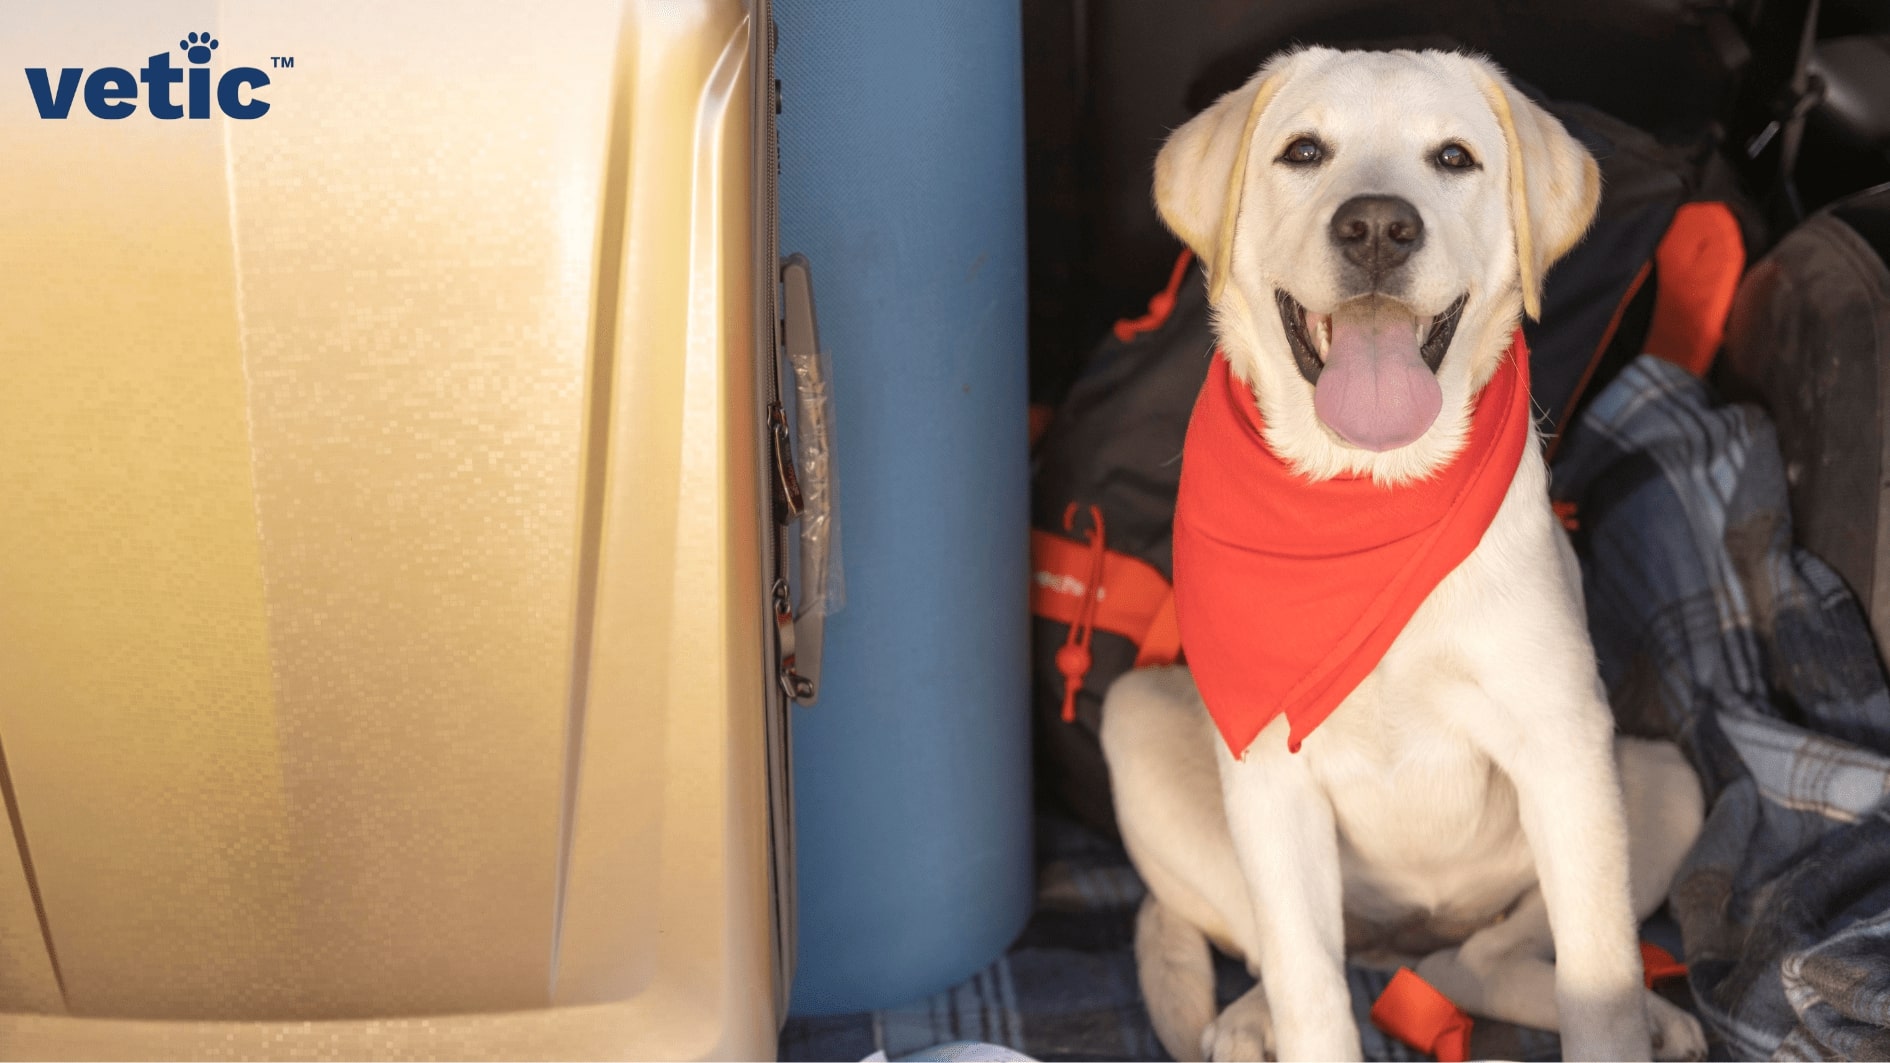 adult labrador retriever wearing a red bandana, sitting beside two suitcases.